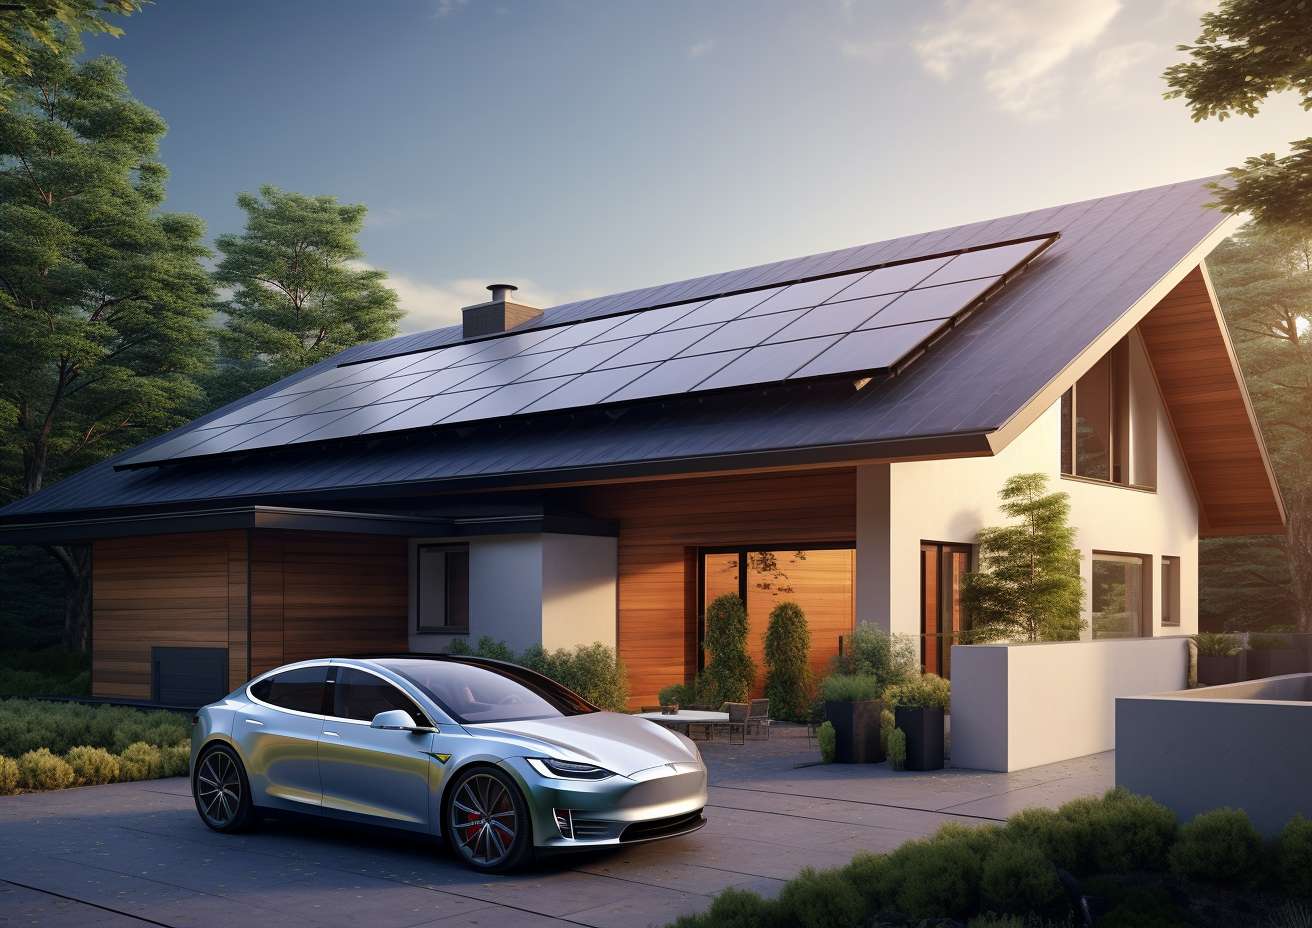 A Tesla Model S parked in front of a house with solar panels, demonstrating the synergy between solar energy and electric vehicle charging.